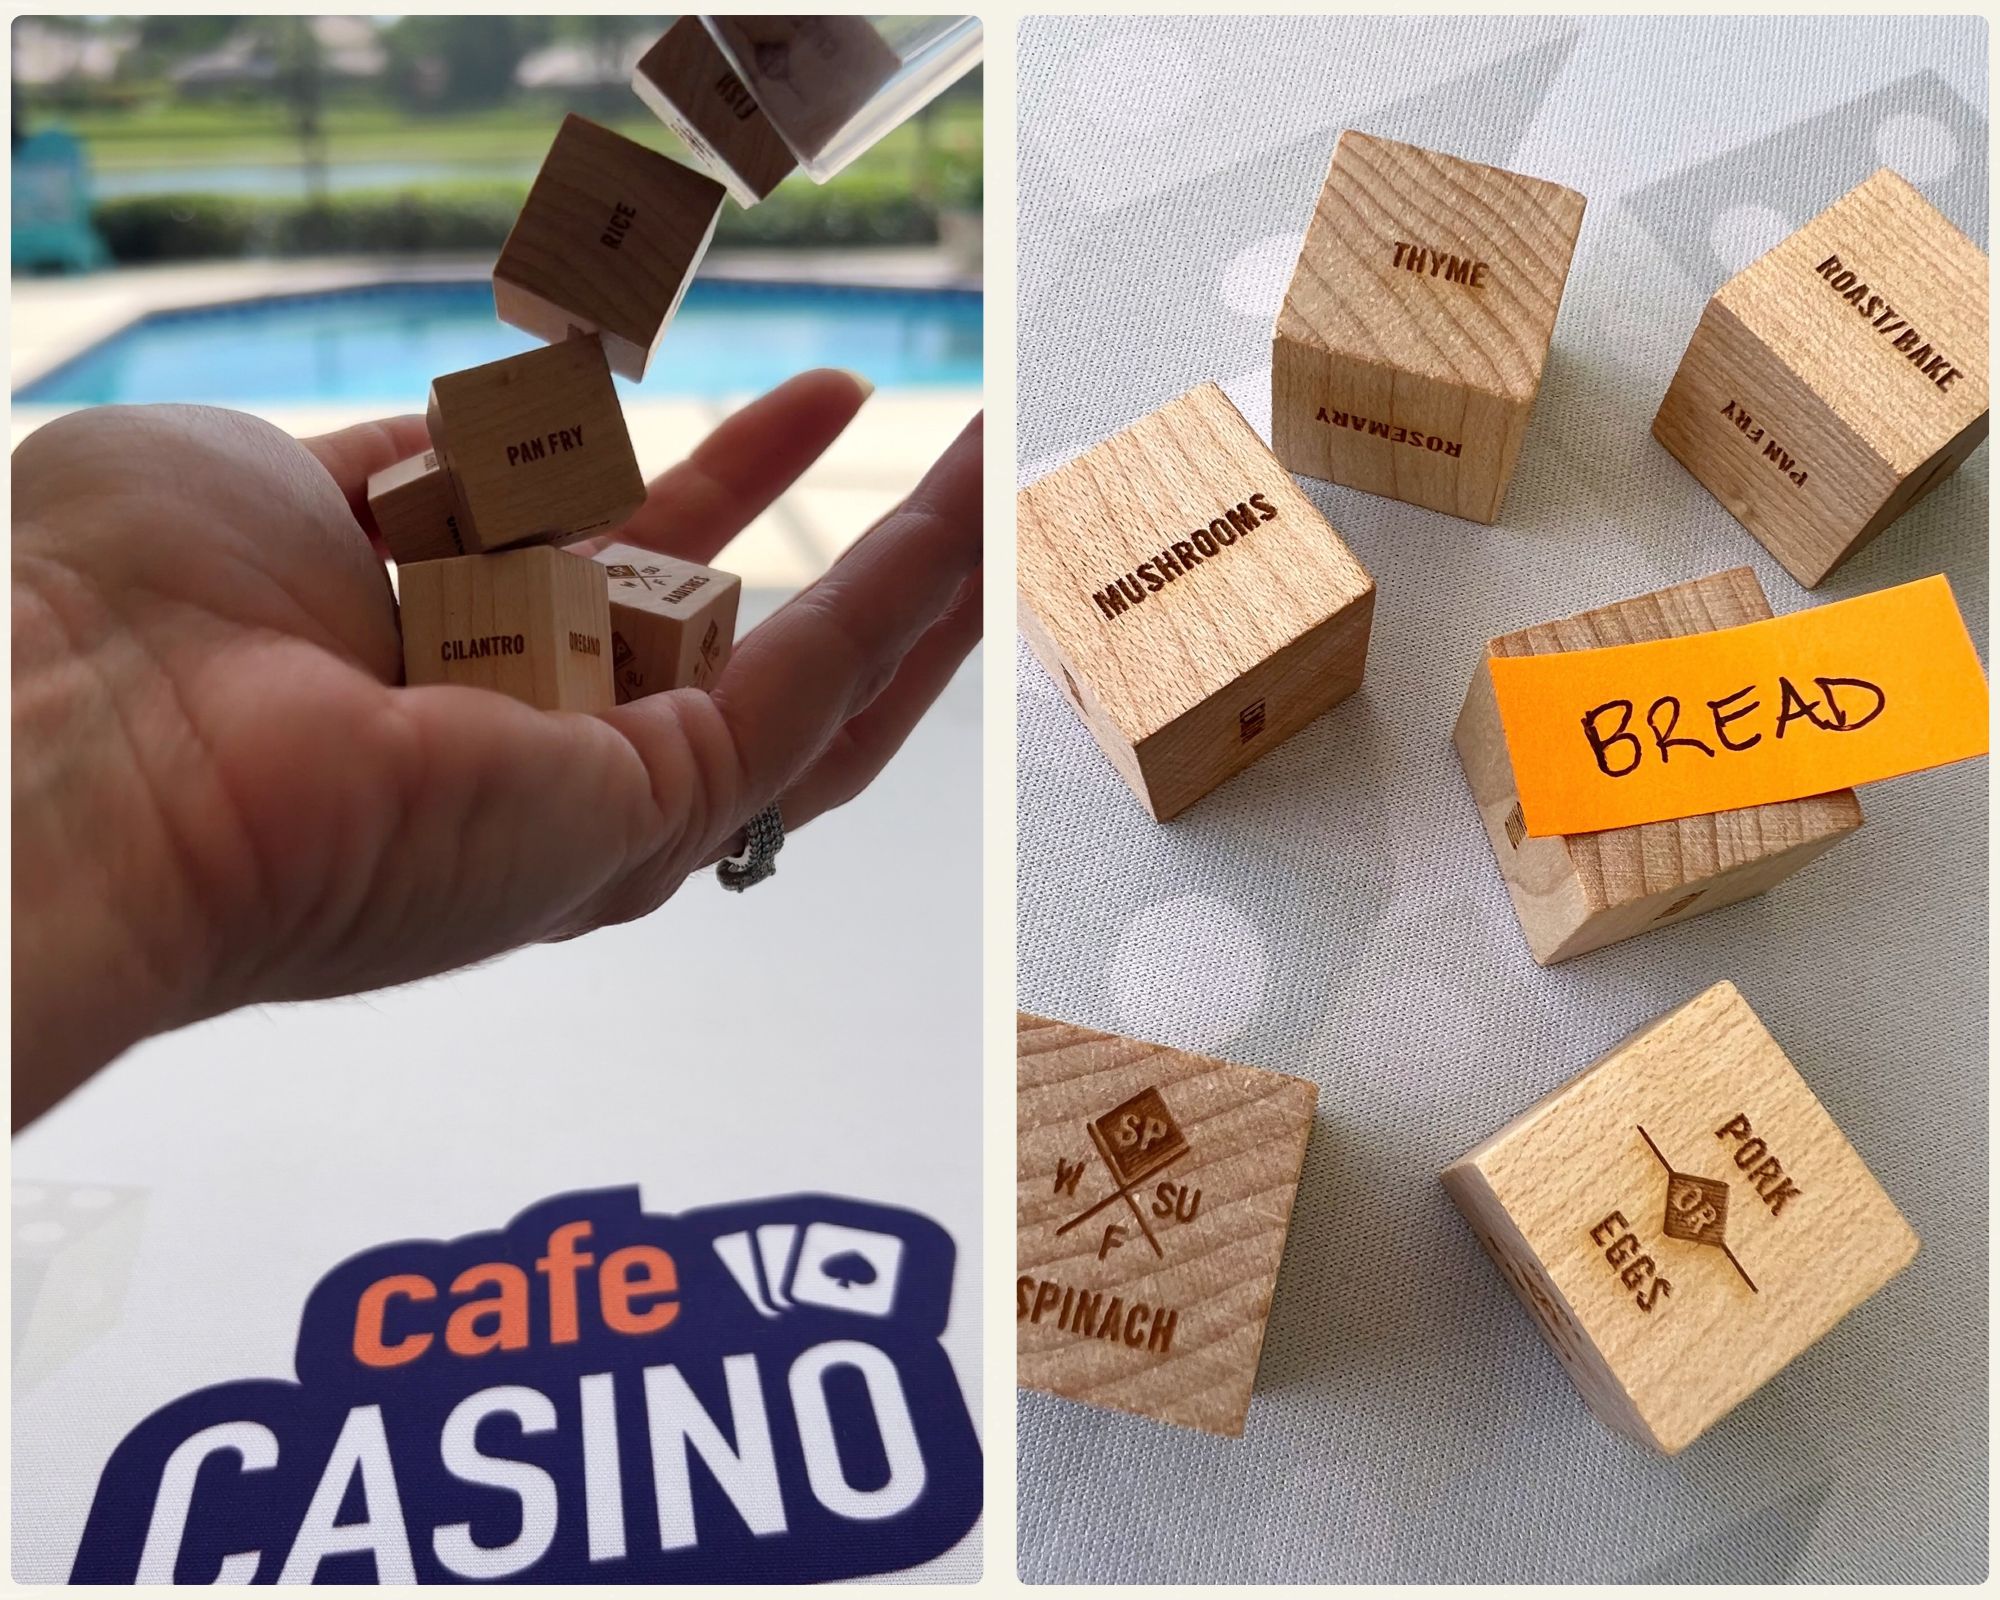 The left side of the image features the logo for the online casino, Cafe Casino, and a hand rolling dice with food groups on it. The right side of the image shows what’s written on the dice after they’ve been rolled: Thyme, Mushrooms, Spinach, Pork or Eggs, Bread, Roast or Bake.